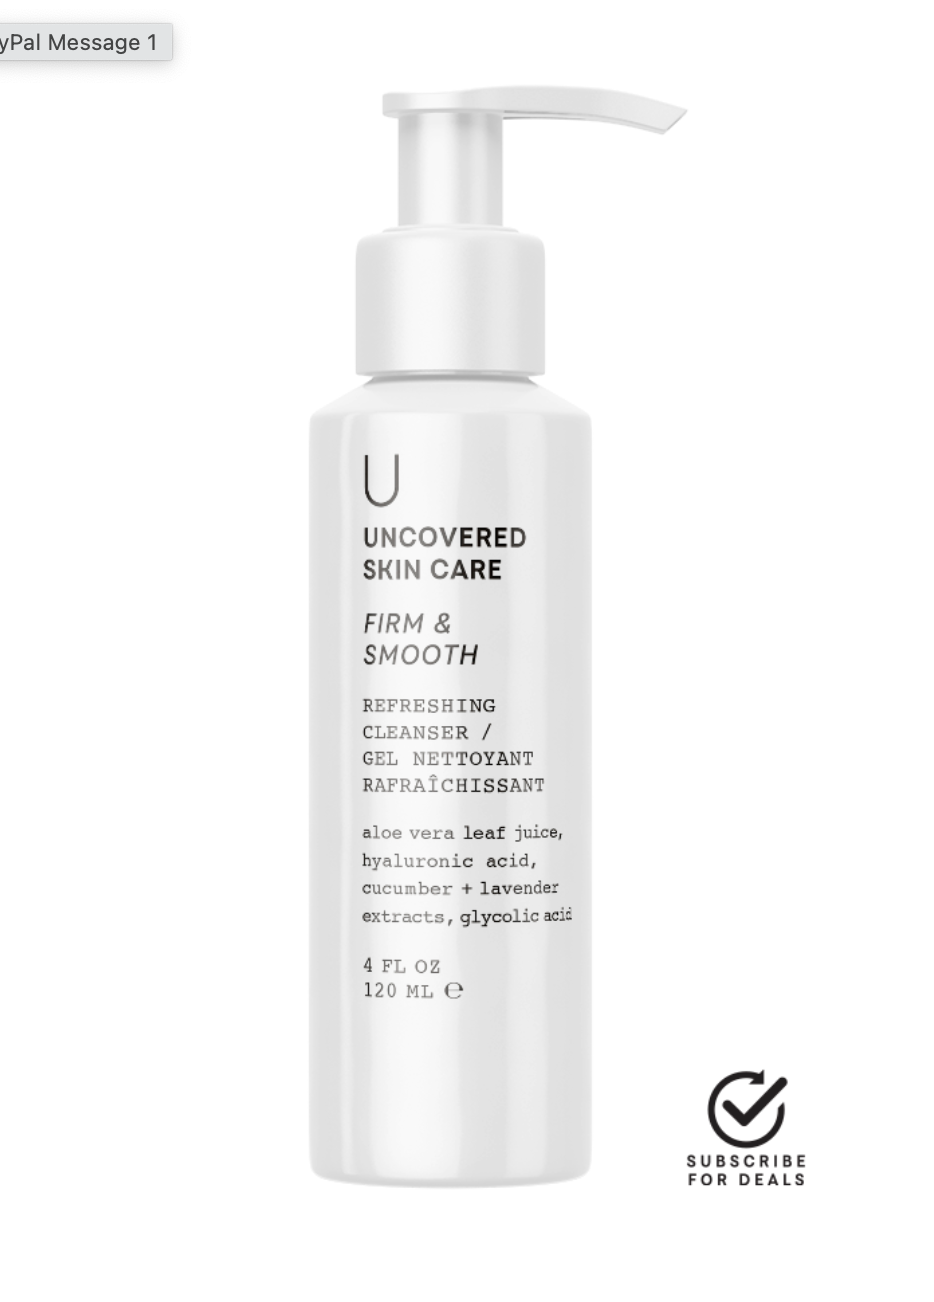 Refreshing Cleanser - Firm & Smooth